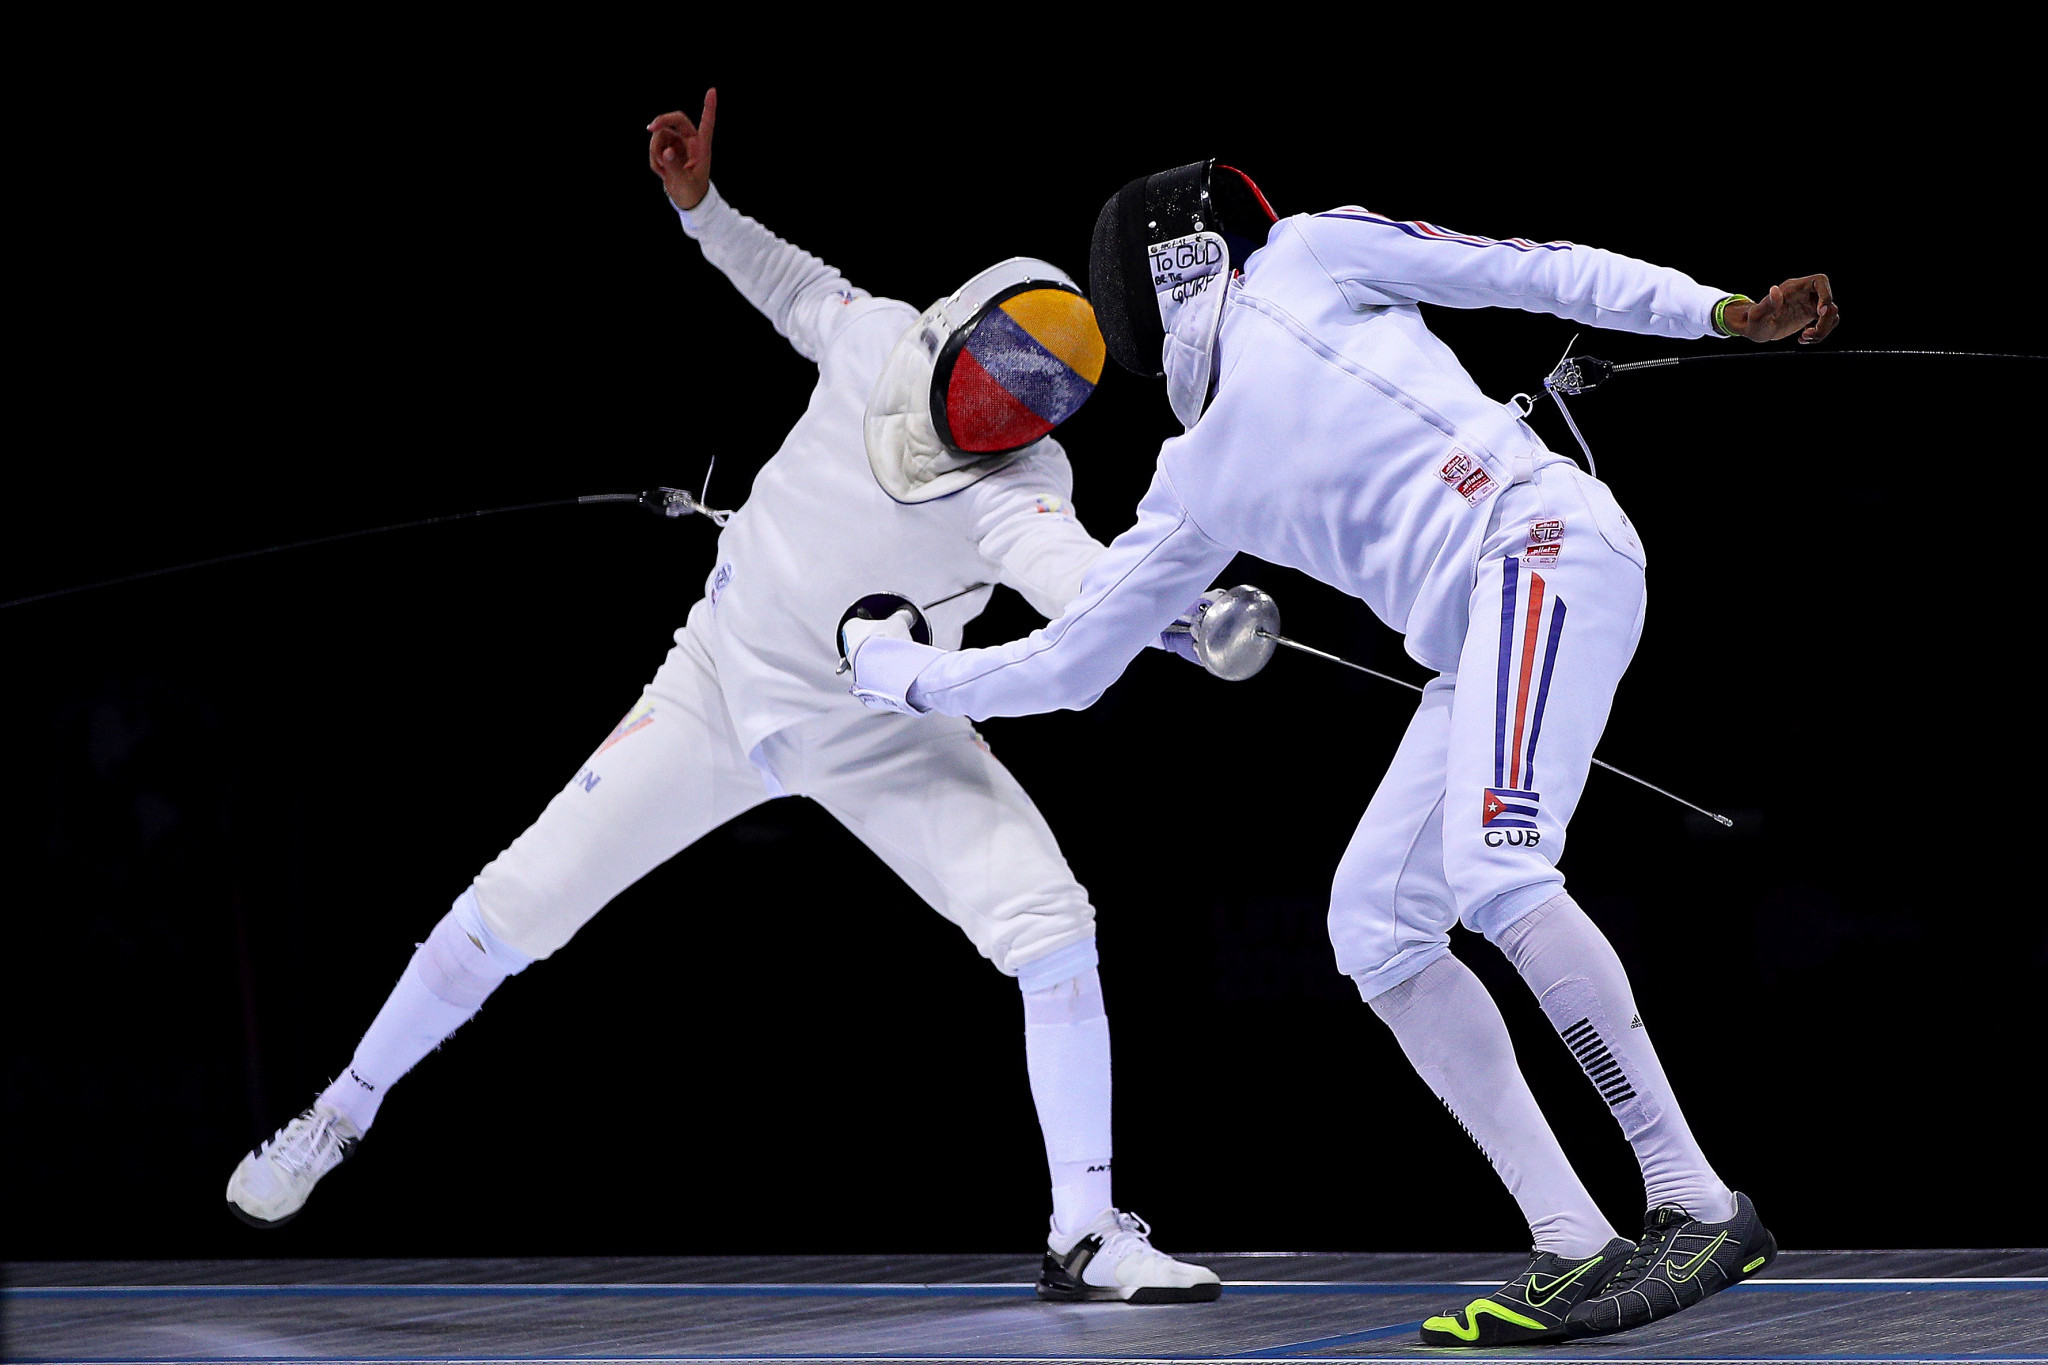 Olympic champion Limardo Gascón wins épée title at first men's FIE World Cup of season